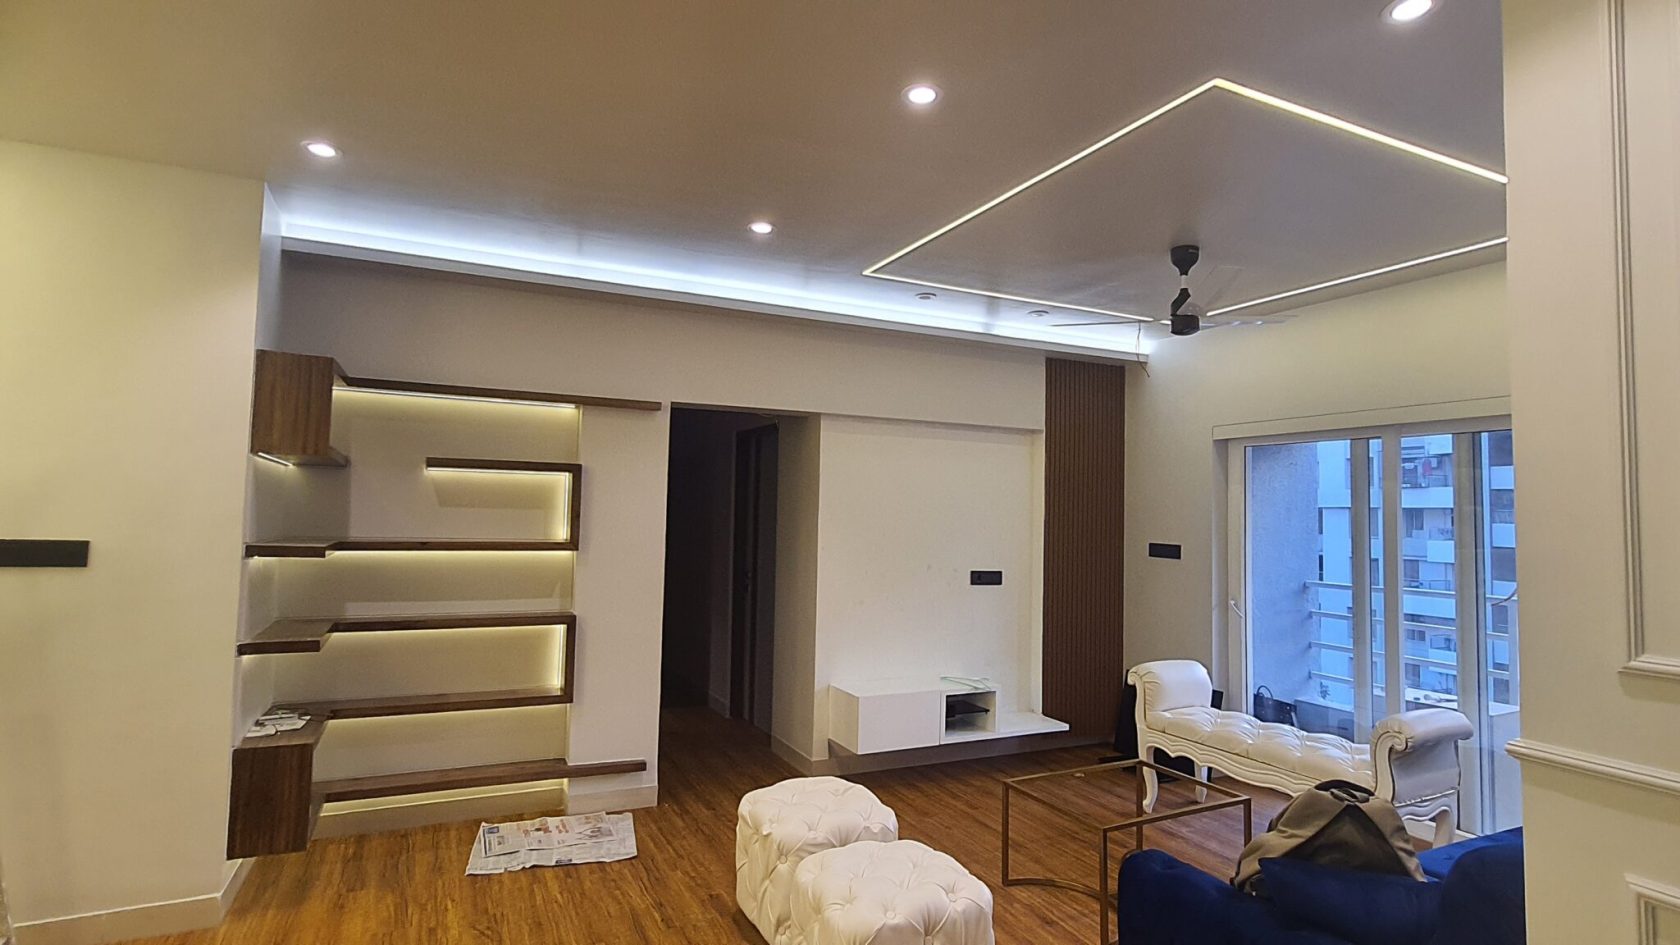 False ceilings are the best design and work for residential houses